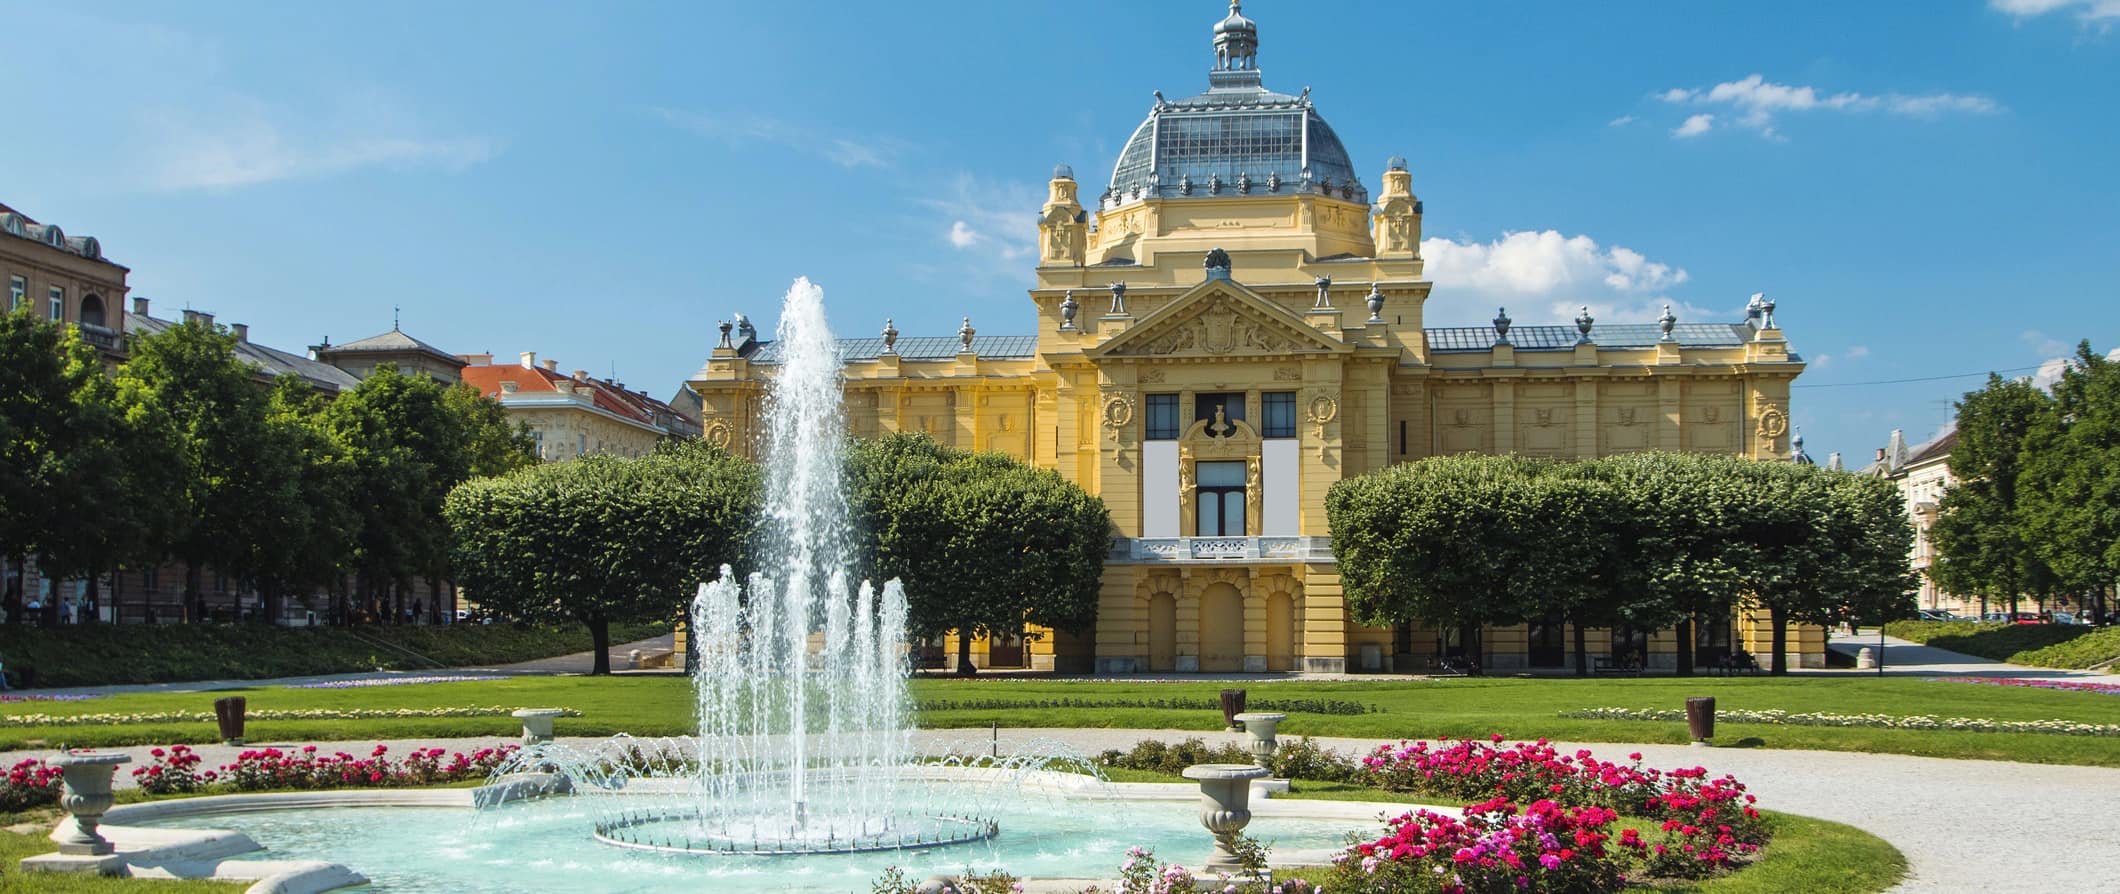 A large historic building with a water fountain in Zagreb, Croatia